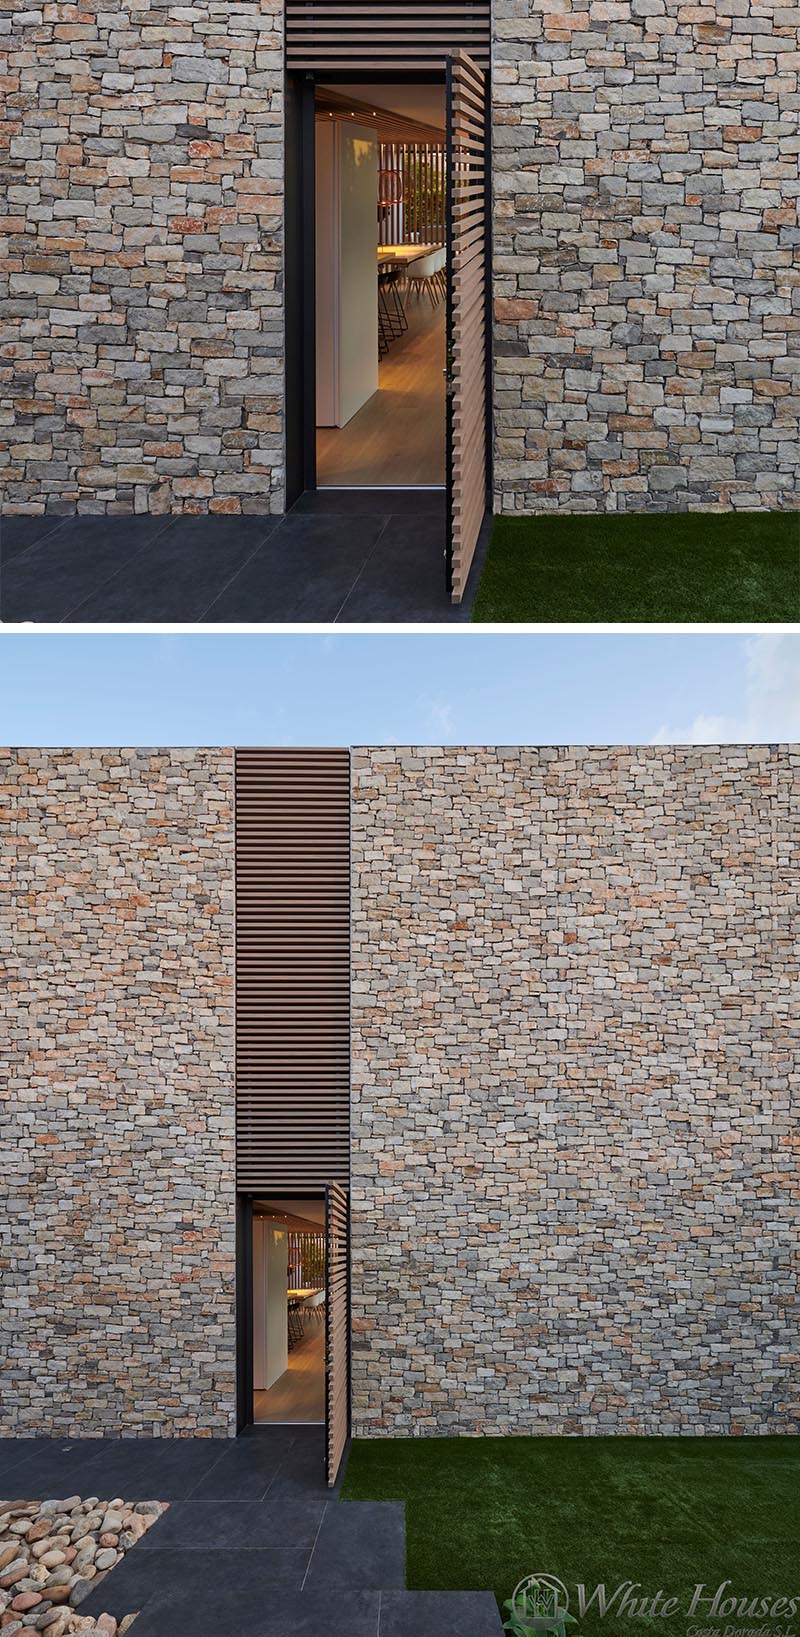 This modern house has a wood slat detail that not only provides visual interest on the facade, but it also hides a door that opens to the interior of the house. #WoodSlat #Facade #ModernHouse #StoneHouse #WoodAccent #Architecture #Doors